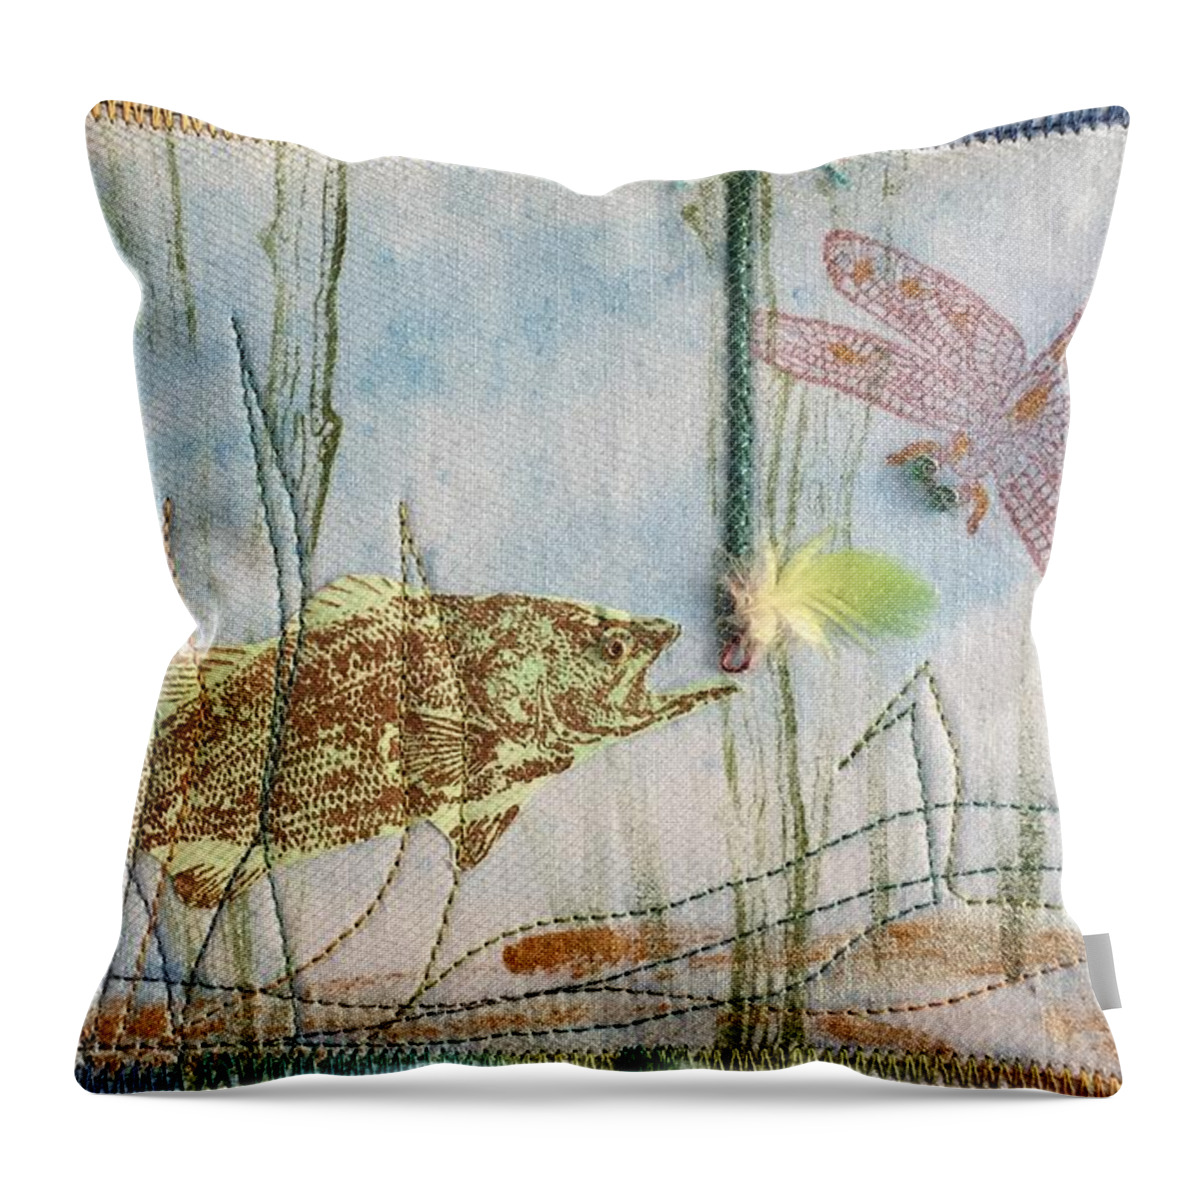 Fish Throw Pillow featuring the mixed media Lures by Vivian Aumond